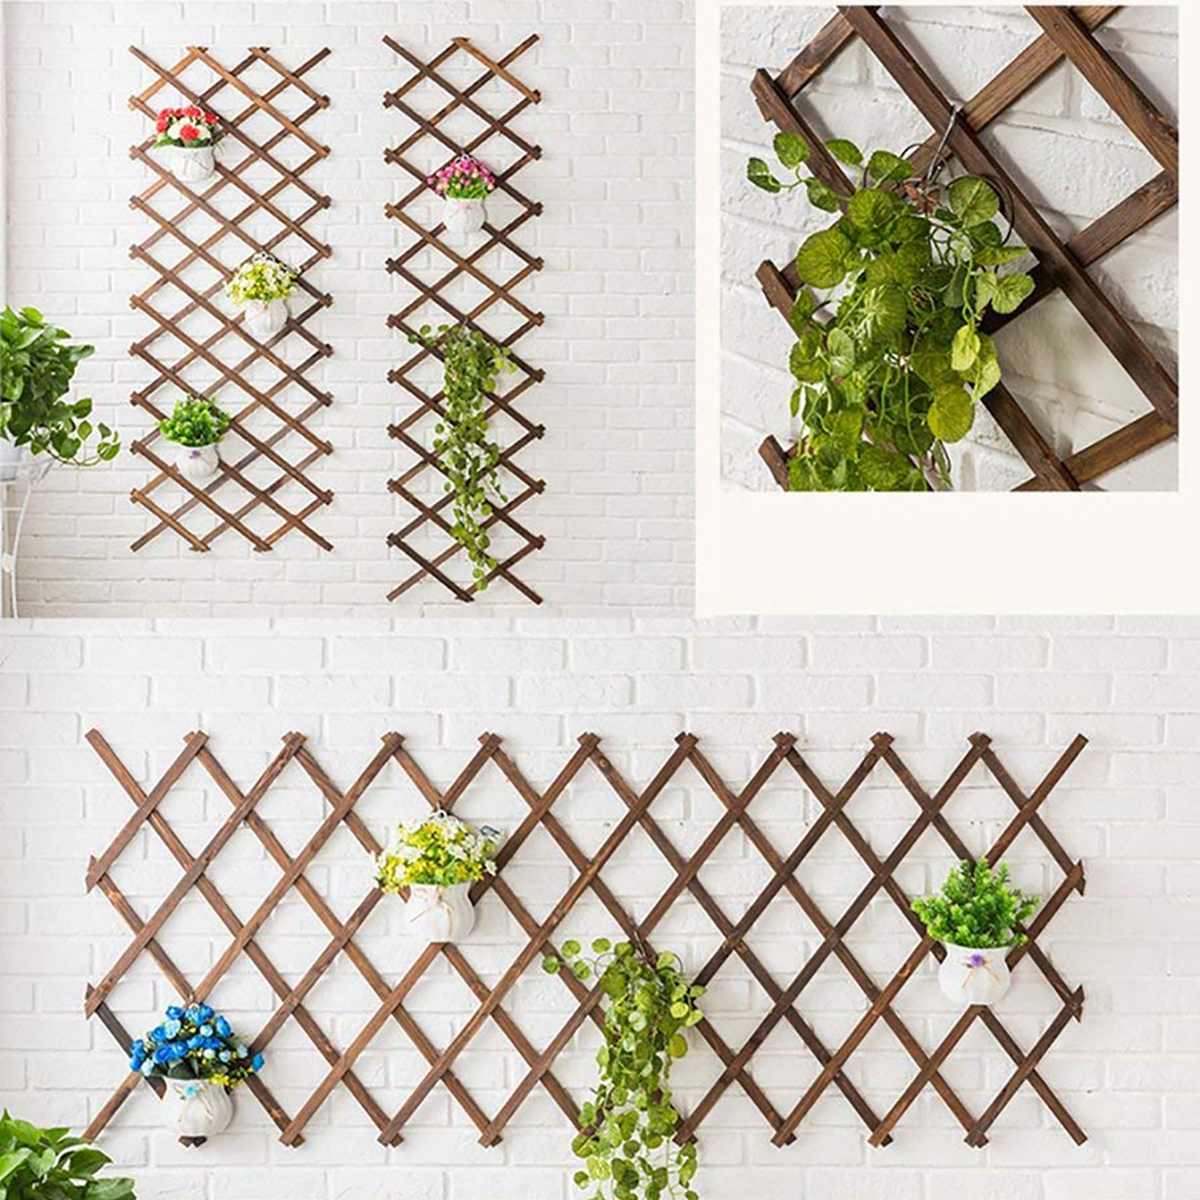 Carbonized Anticorrosive Wood Pull Net Garden Wall Fence Panel Plant Climb Trellis Support Decorative Garden Fence for Home Yard